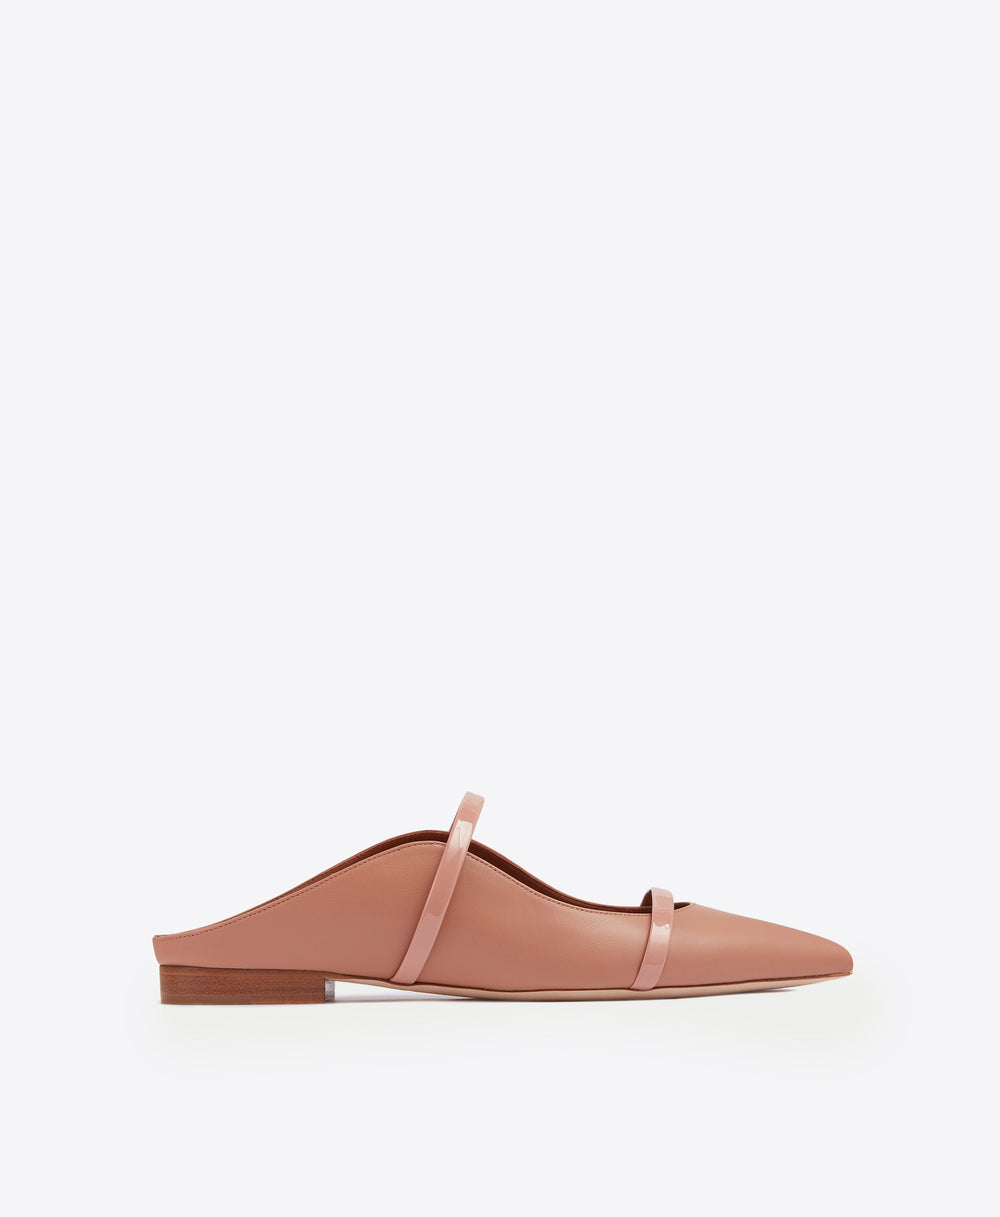 The Classics: Women's Designer Shoes | Malone Souliers